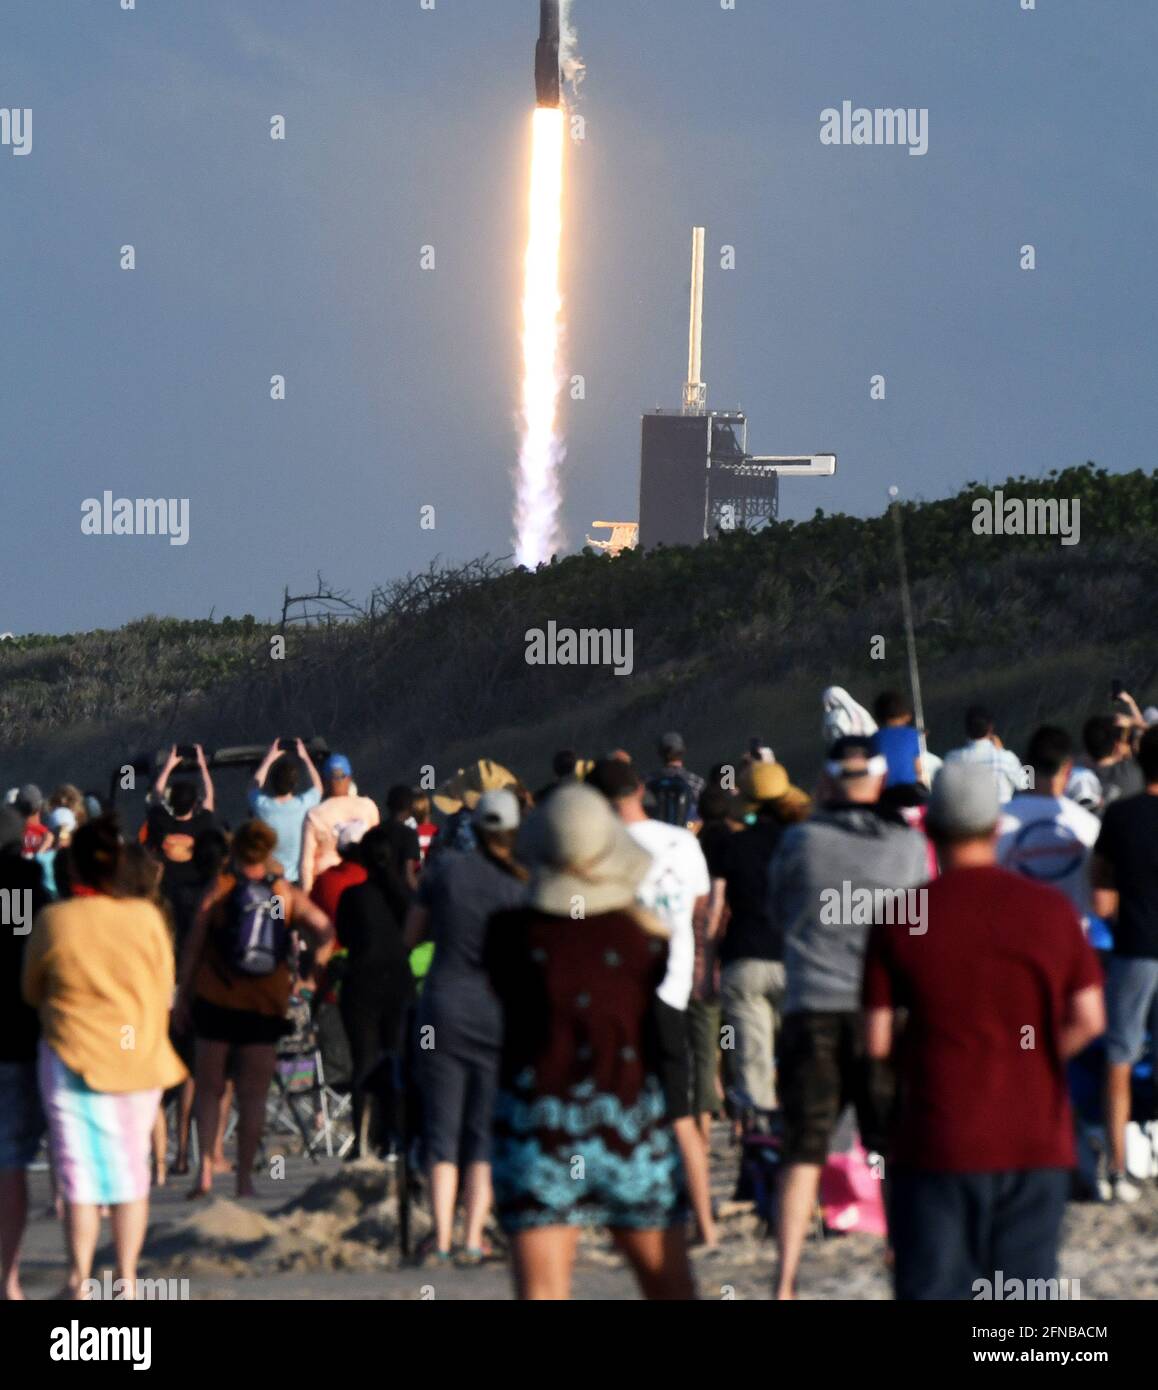 Cape Canaveral, United States. 15th May, 2021. People watch from Playalinda Beach at Canaveral National Seashore as a SpaceX Falcon 9 rocket carrying the 28th batch of satellites for SpaceXs Starlink broadband network launches from pad 39A at the Kennedy Space Center. In addition to 52 Starlink satellites, the rocket is also carrying rideshare payloads for Capella Space and Tyvak Nano-Satellite Systems. Credit: SOPA Images Limited/Alamy Live News Stock Photo